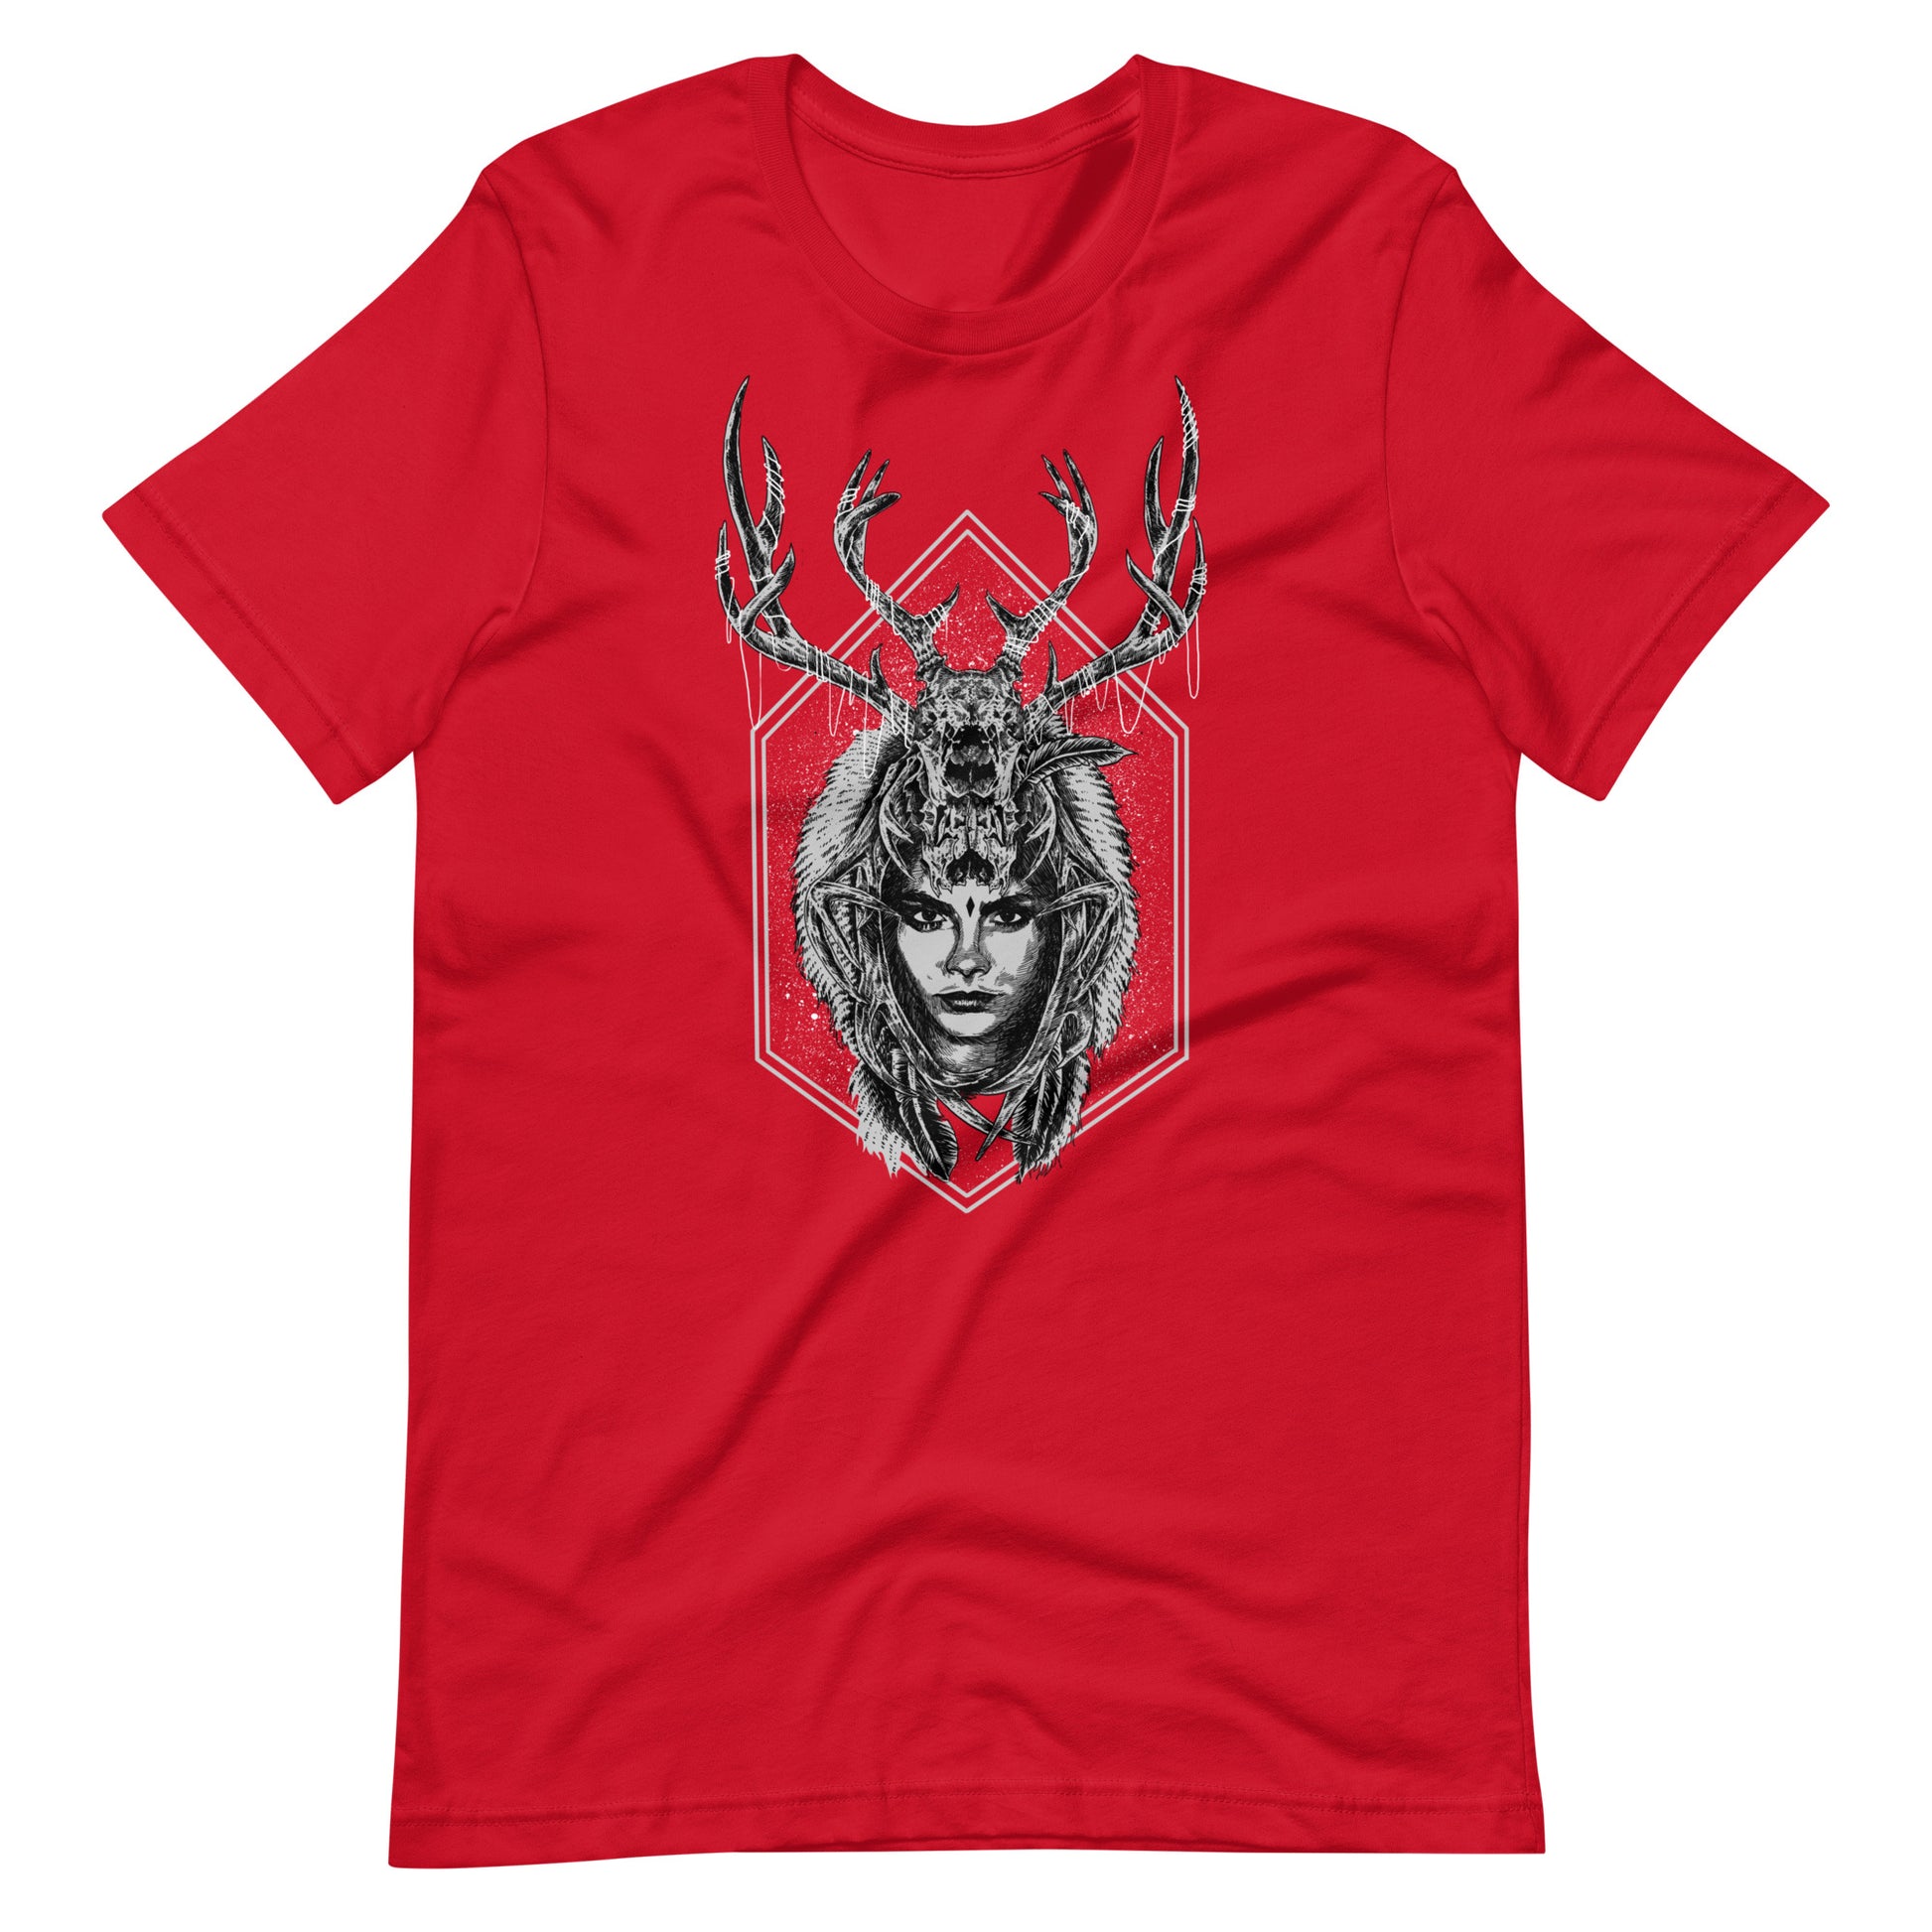 Tribe Empire - Men's t-shirt - Red Front